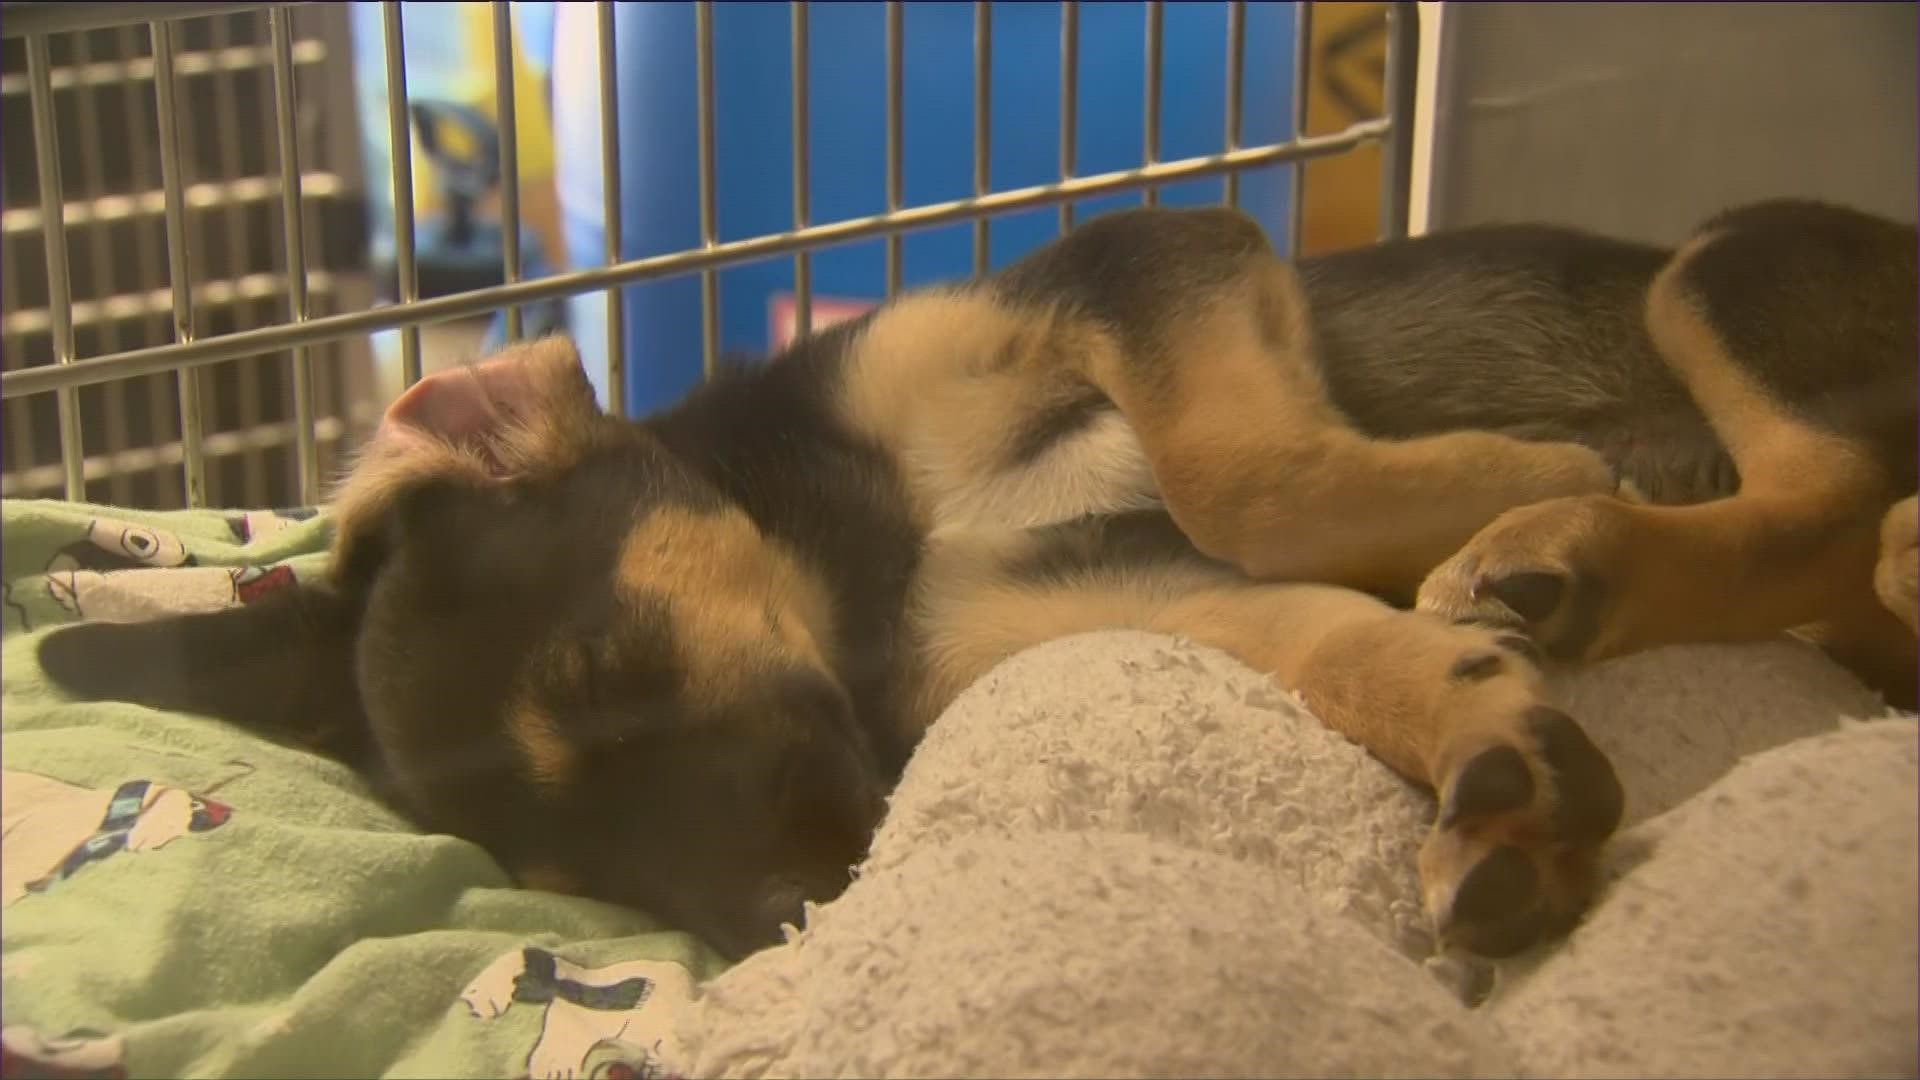 The shelters say hot temperatures and overcrowding are impacting the animals' quality of life.